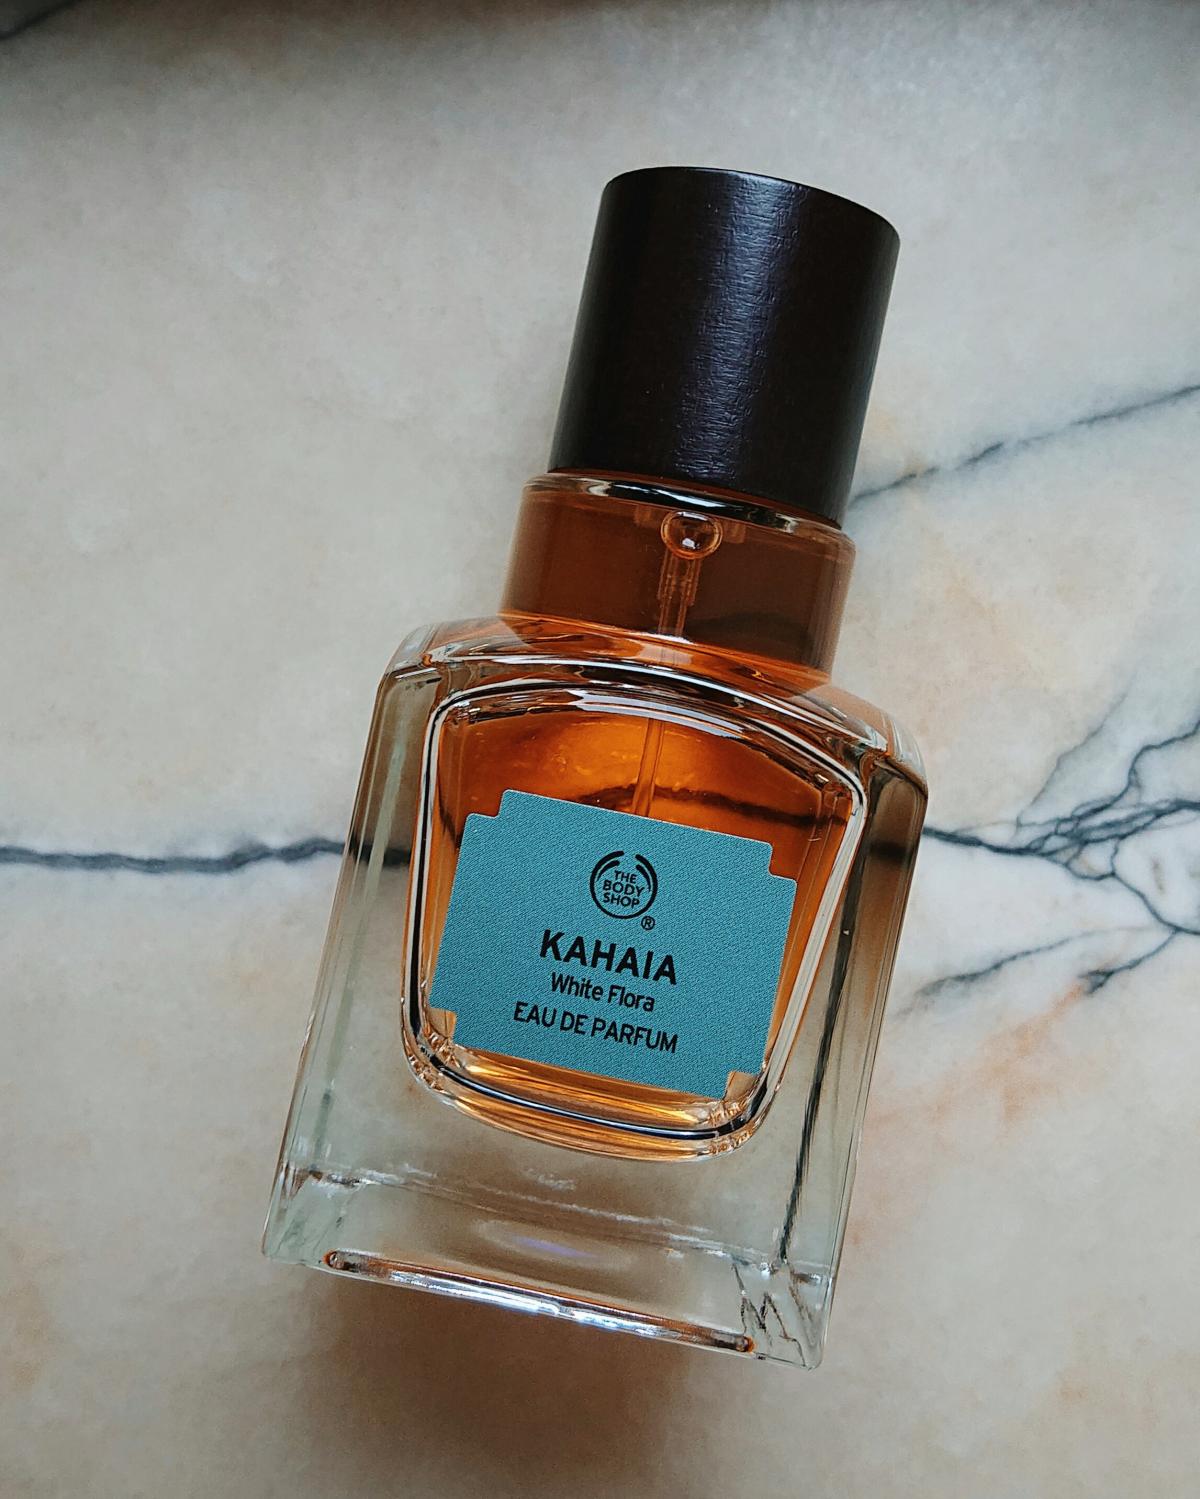 Kahaia The Body Shop perfume - a fragrance for women and men 2016